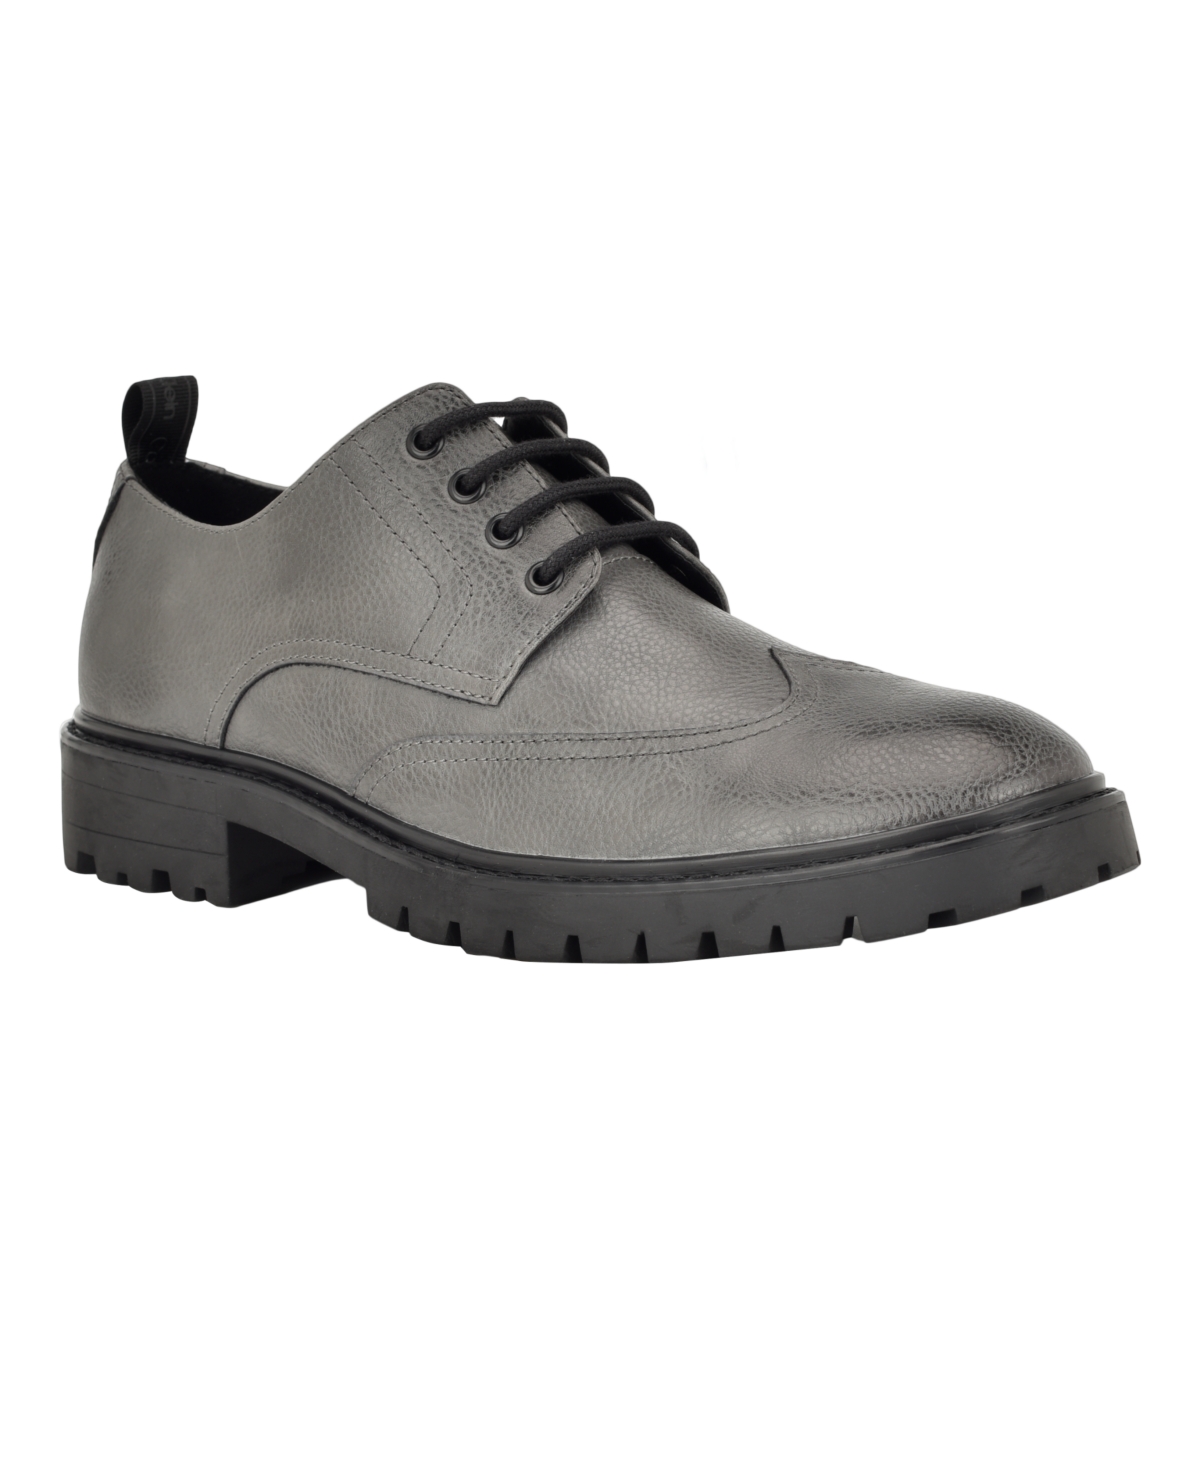 Calvin Klein Men's Ling Dress Lace-up Loafers In Medium Gray Leather